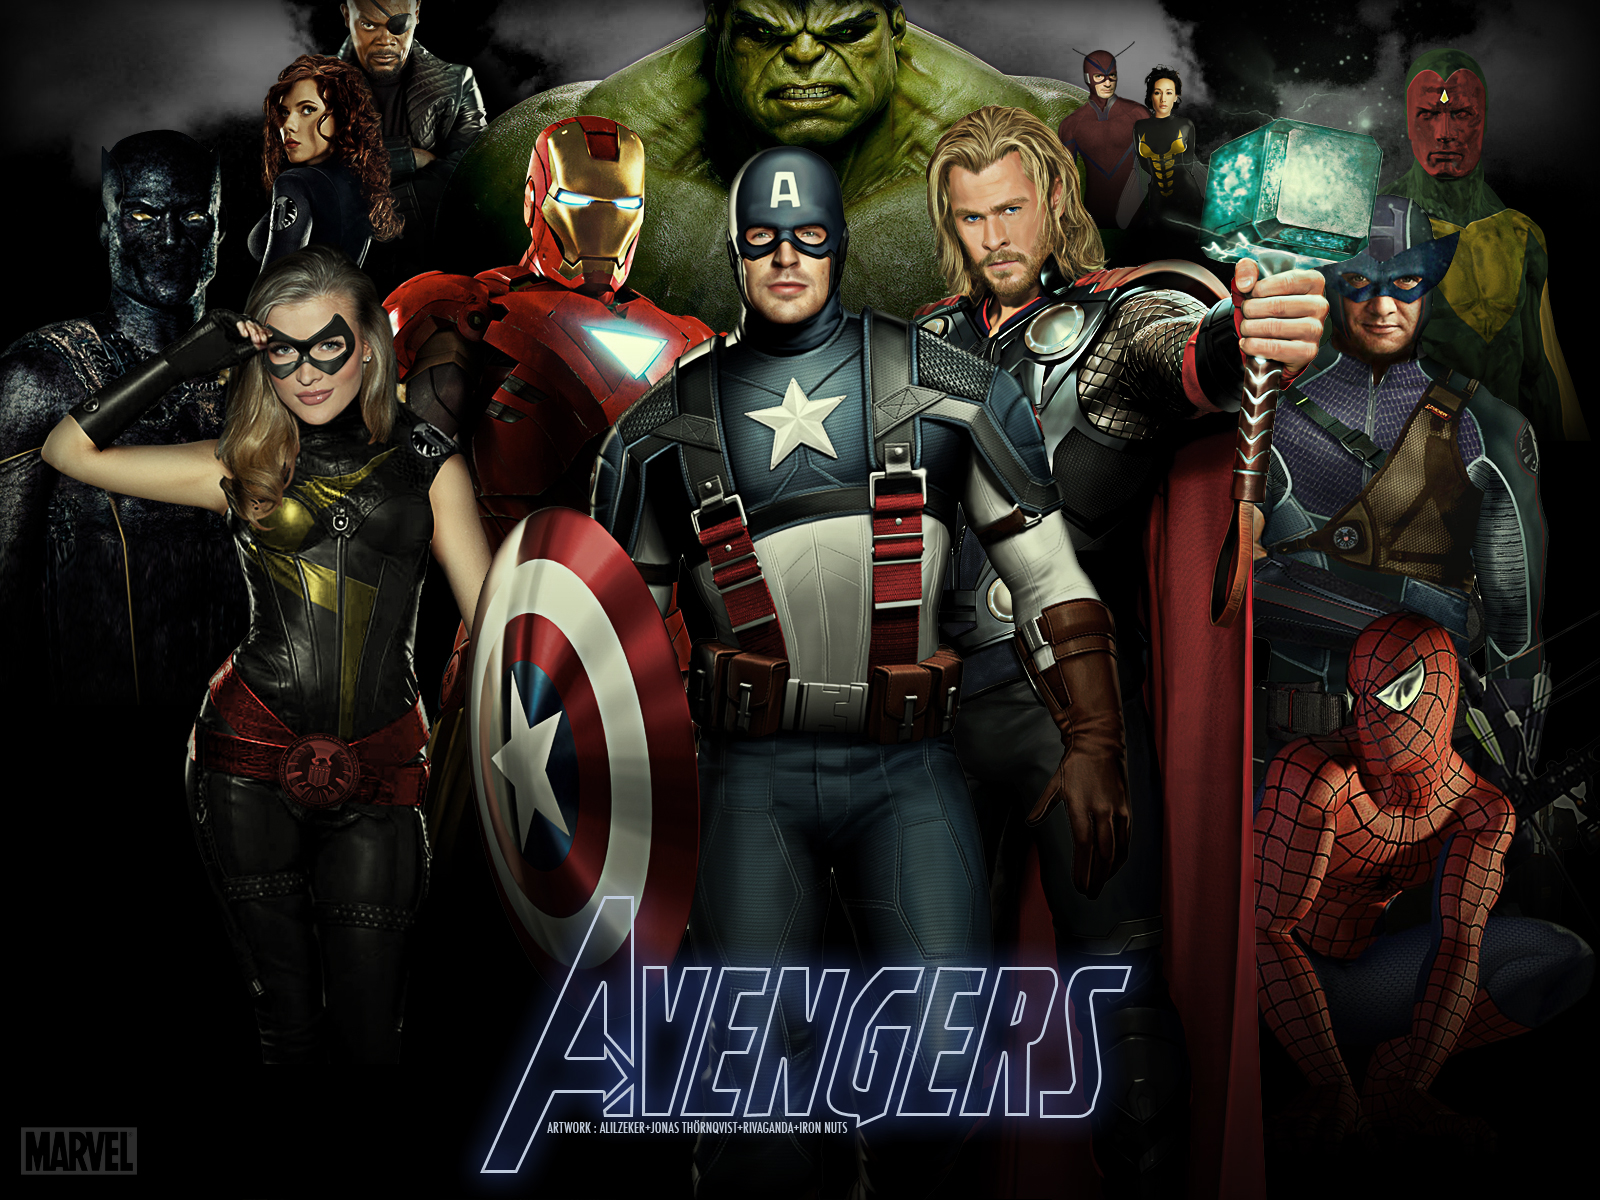 Marvel Avengers Movie HD Wallpapers wallpapers hdwallpapers for 1600x1200